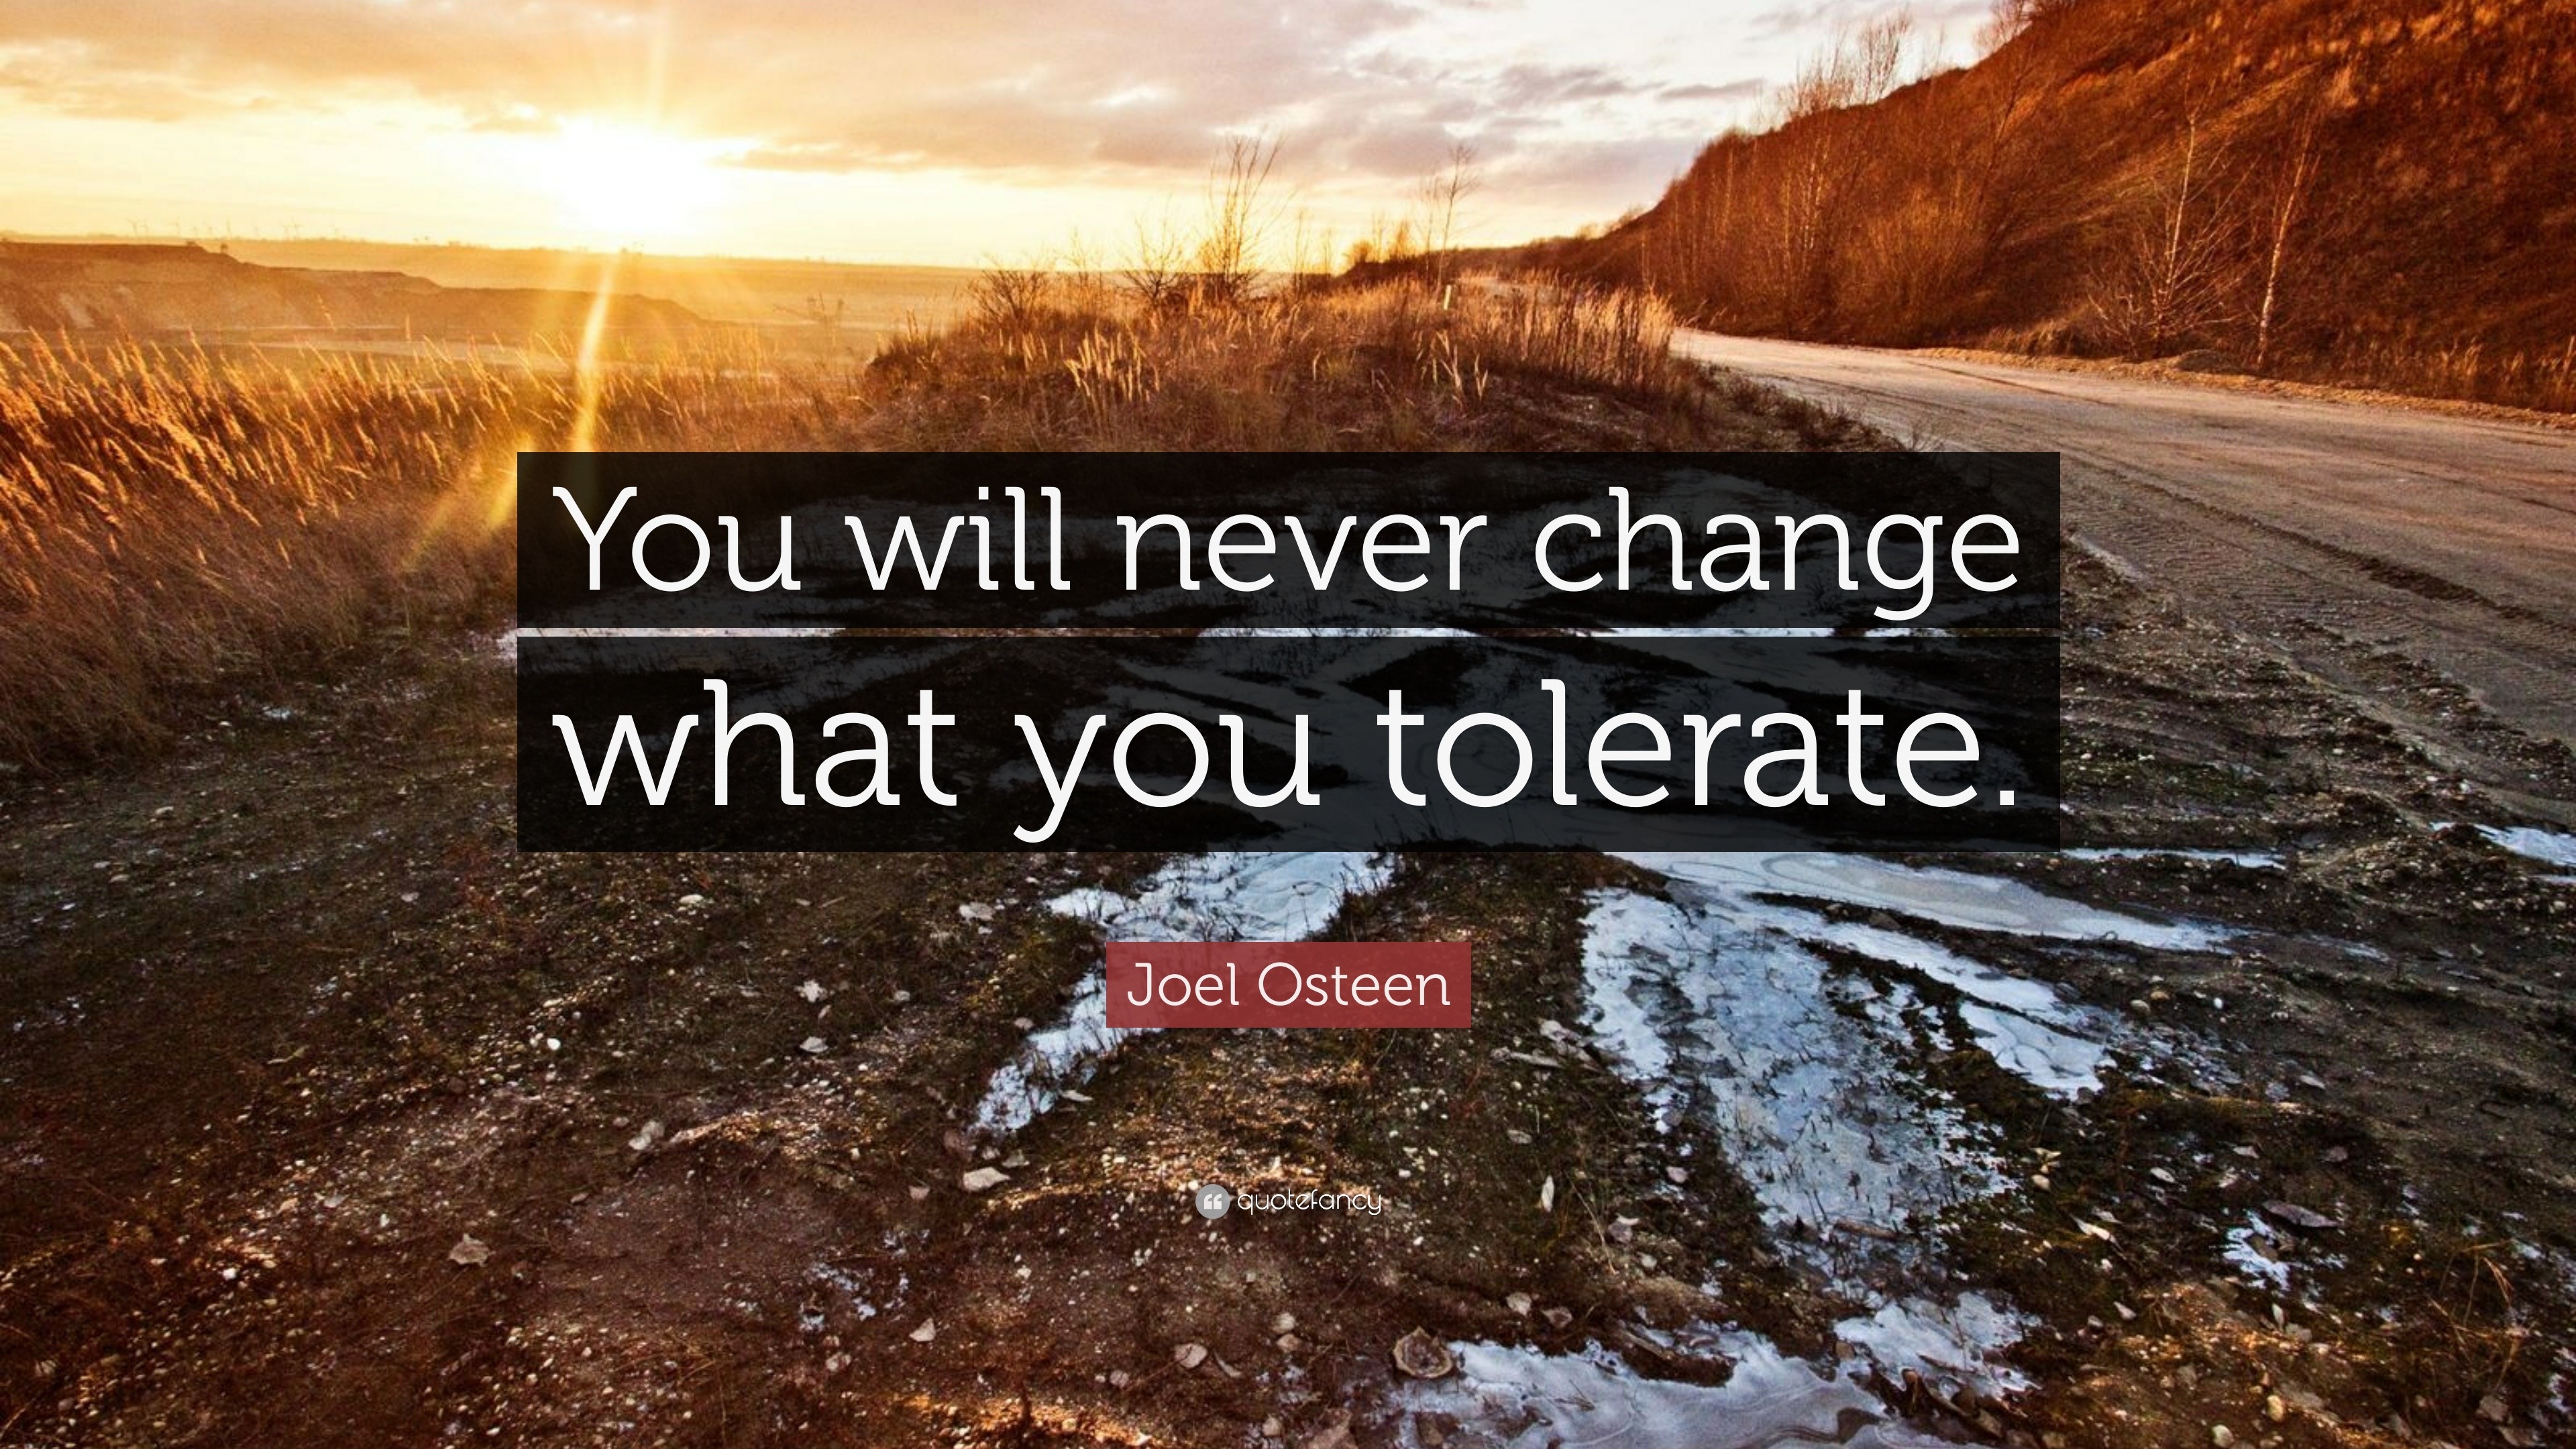 Joel Osteen Quote: "You will never change what you tolerate." (12 wallpapers) - Quotefancy